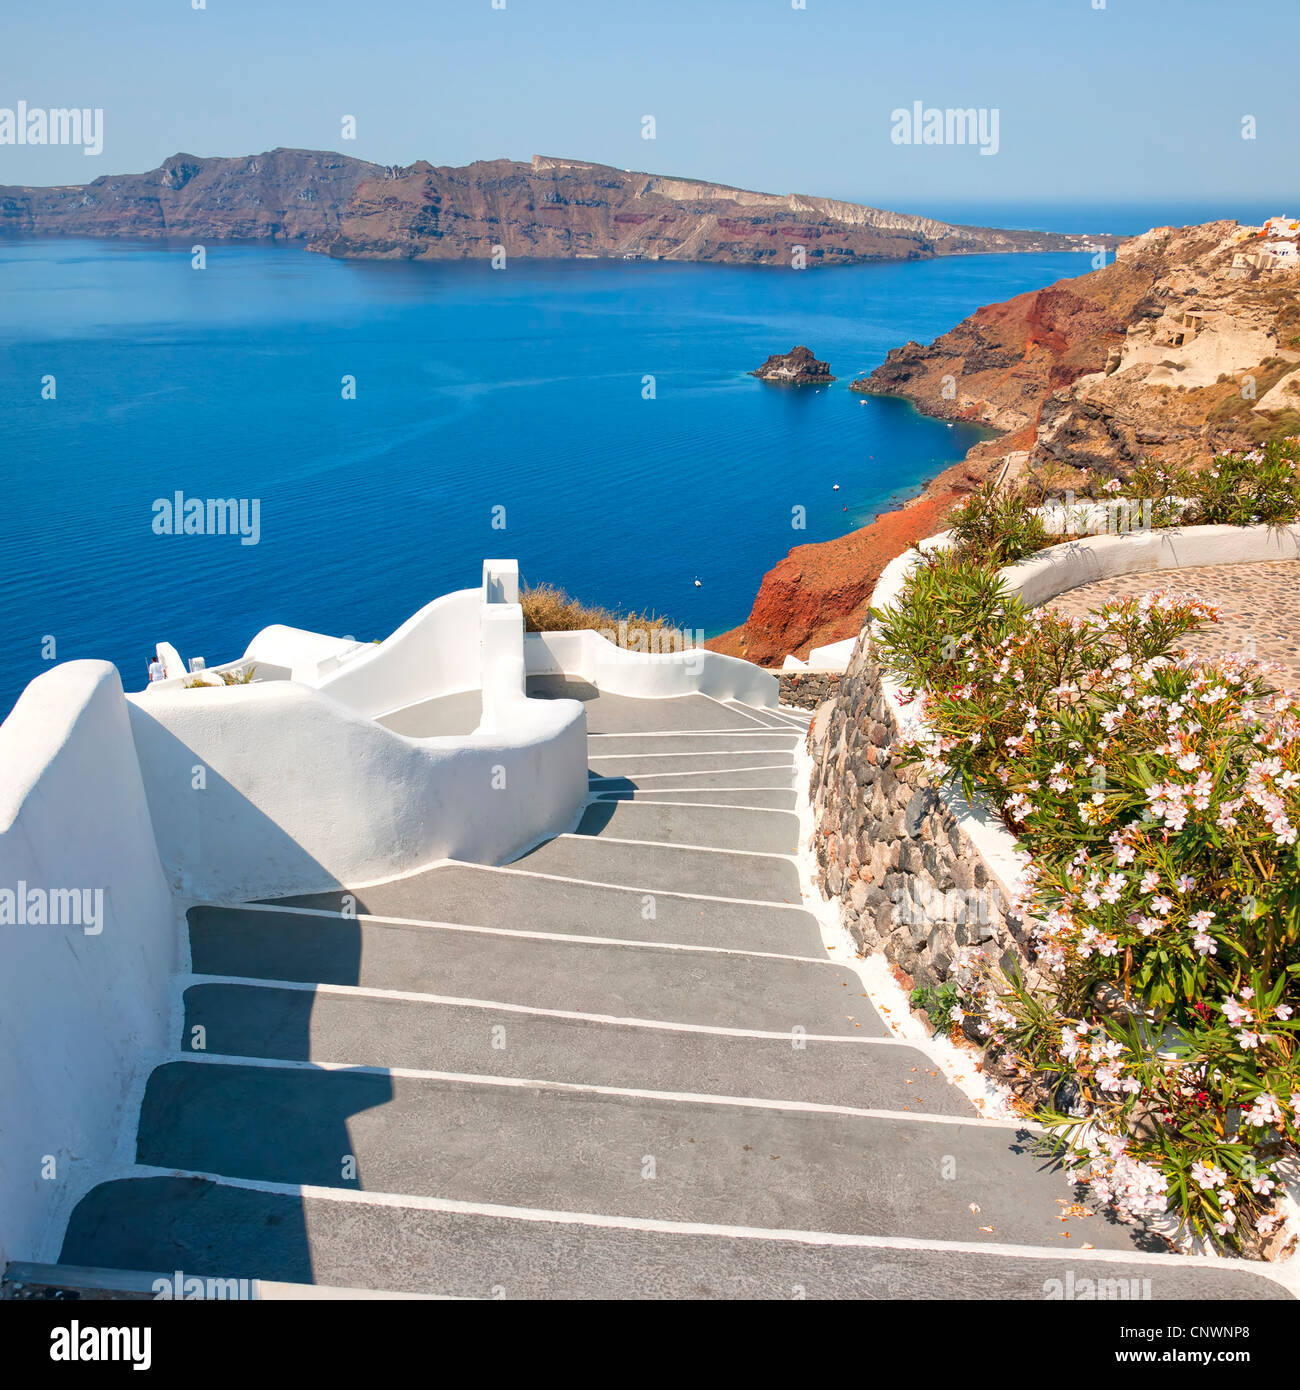 A Typical Stairway Situated In The Village Of Oia On The Greek Island